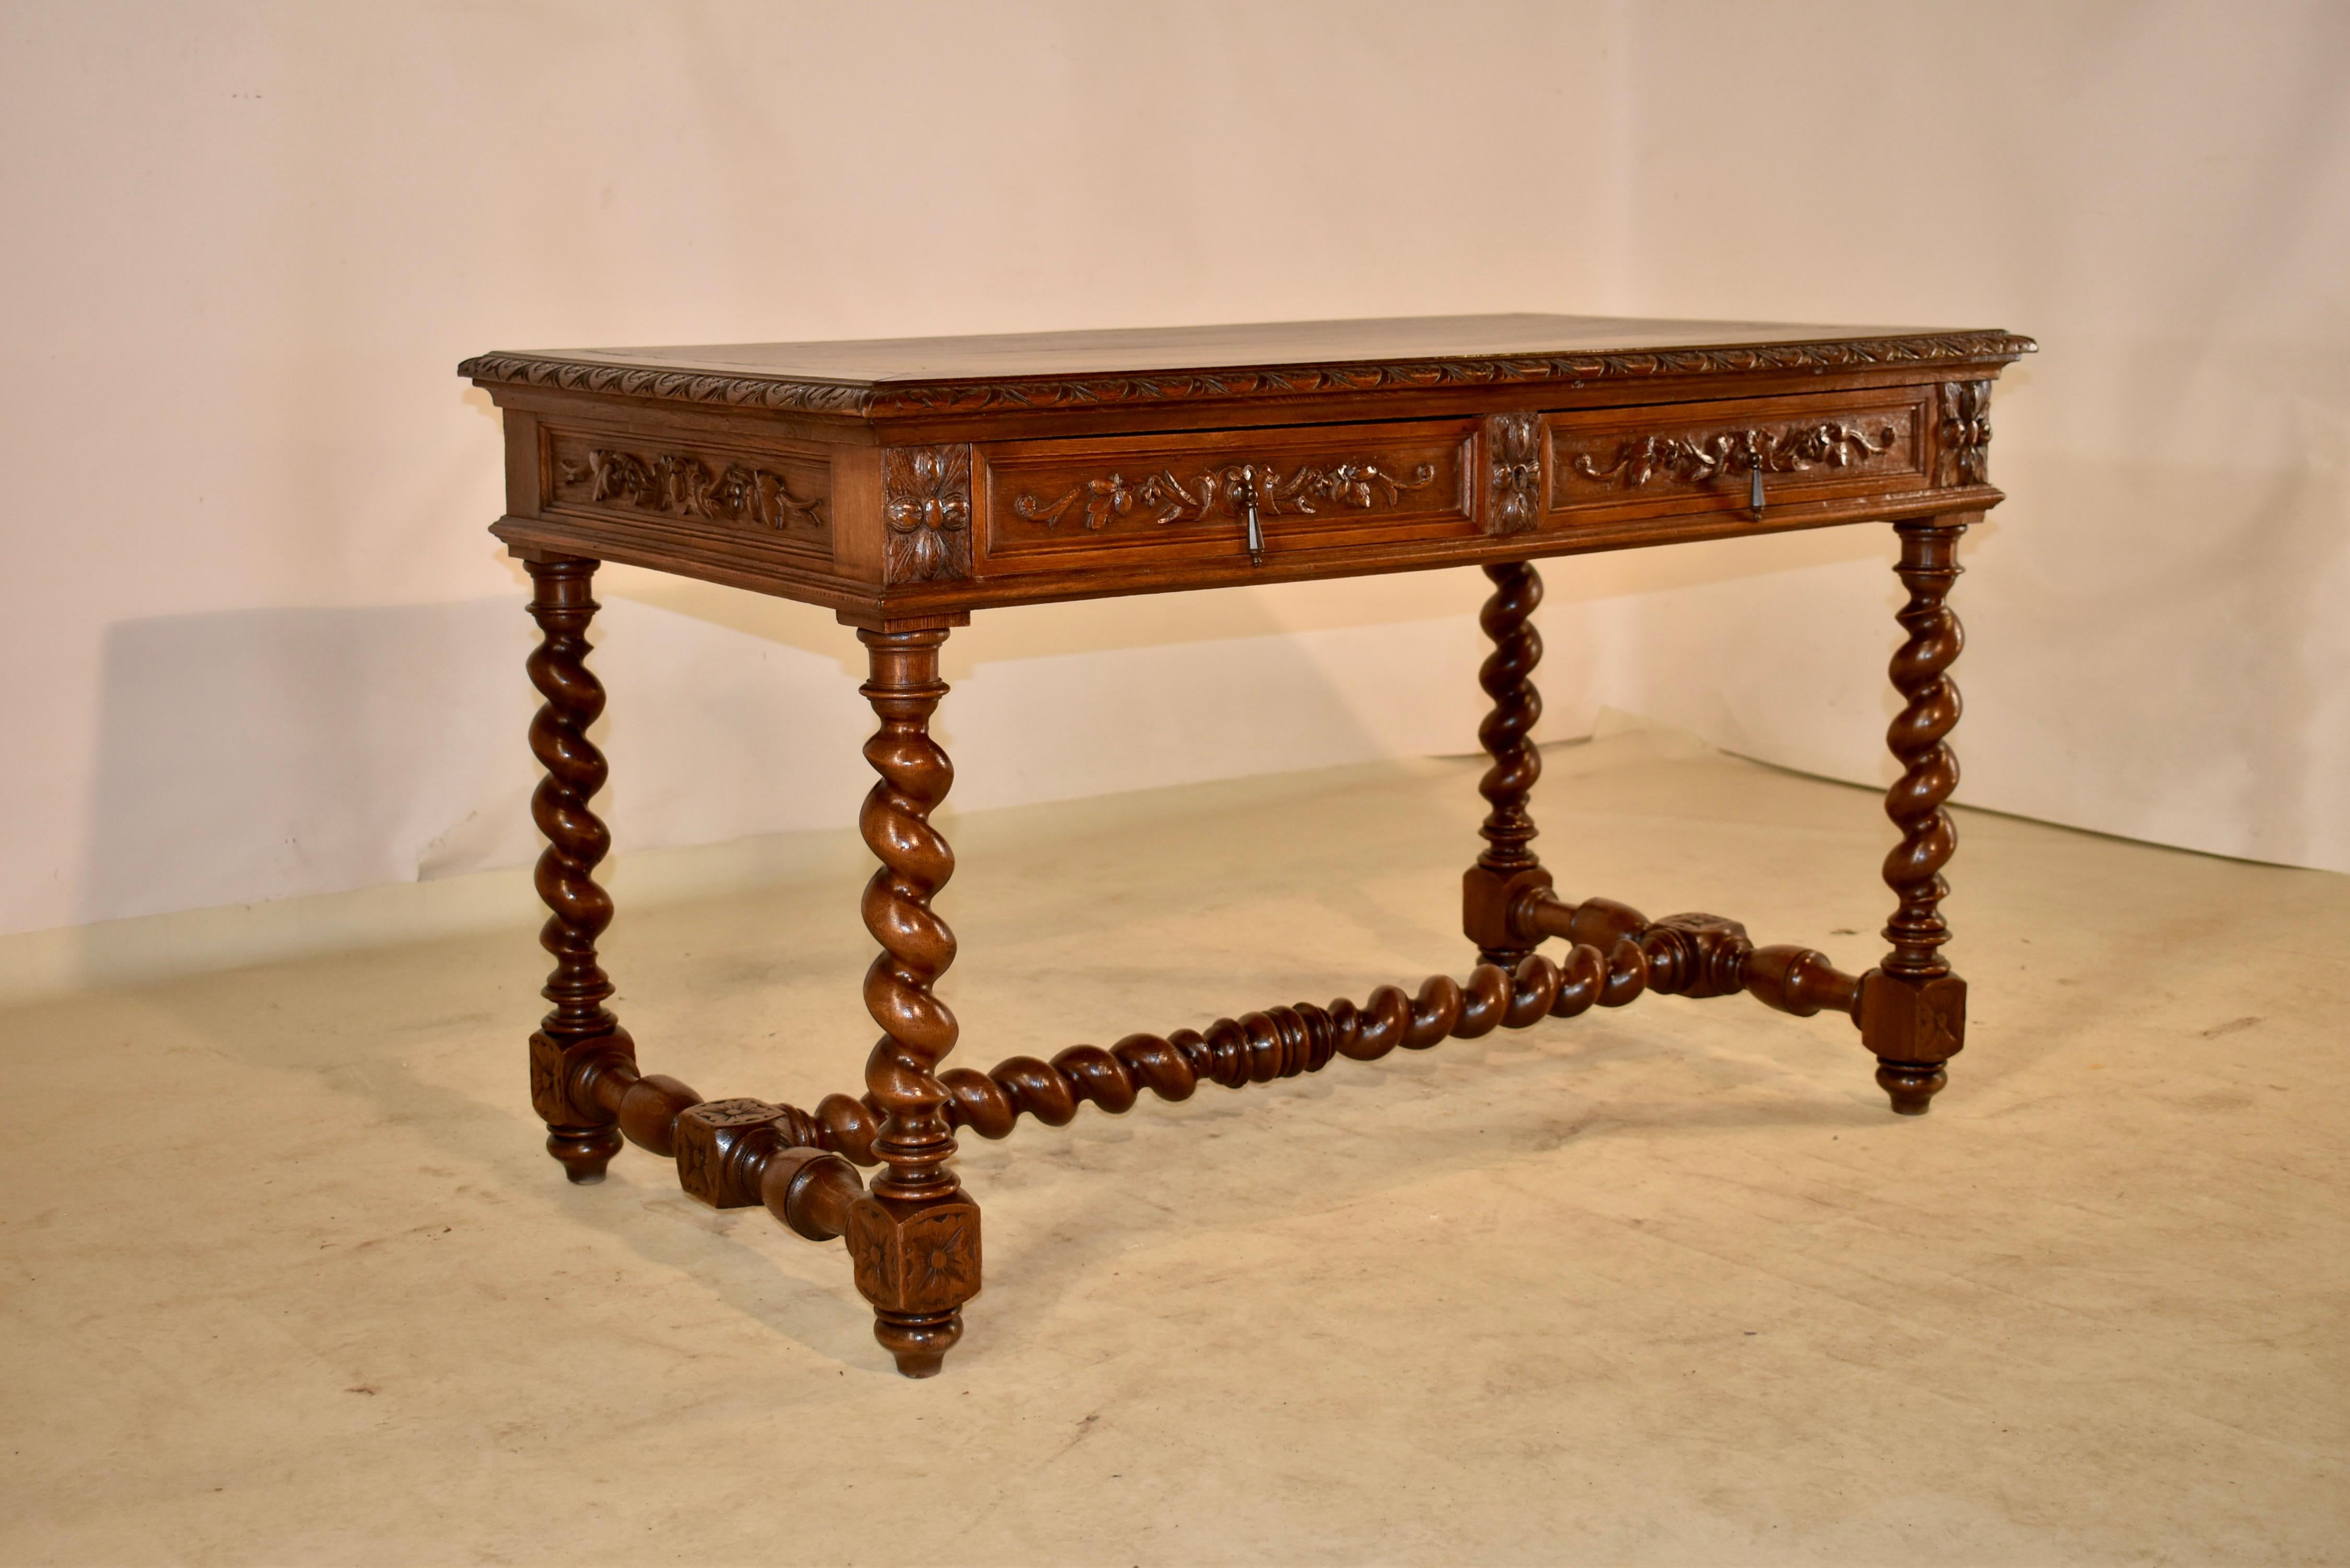 19th century oak writing table from France with a banded top, which also has a lovely hand carved and beveled edge, following down to paneled aprons, all with hand carved decoration. the carving is on all four sides for easy placement in any room.